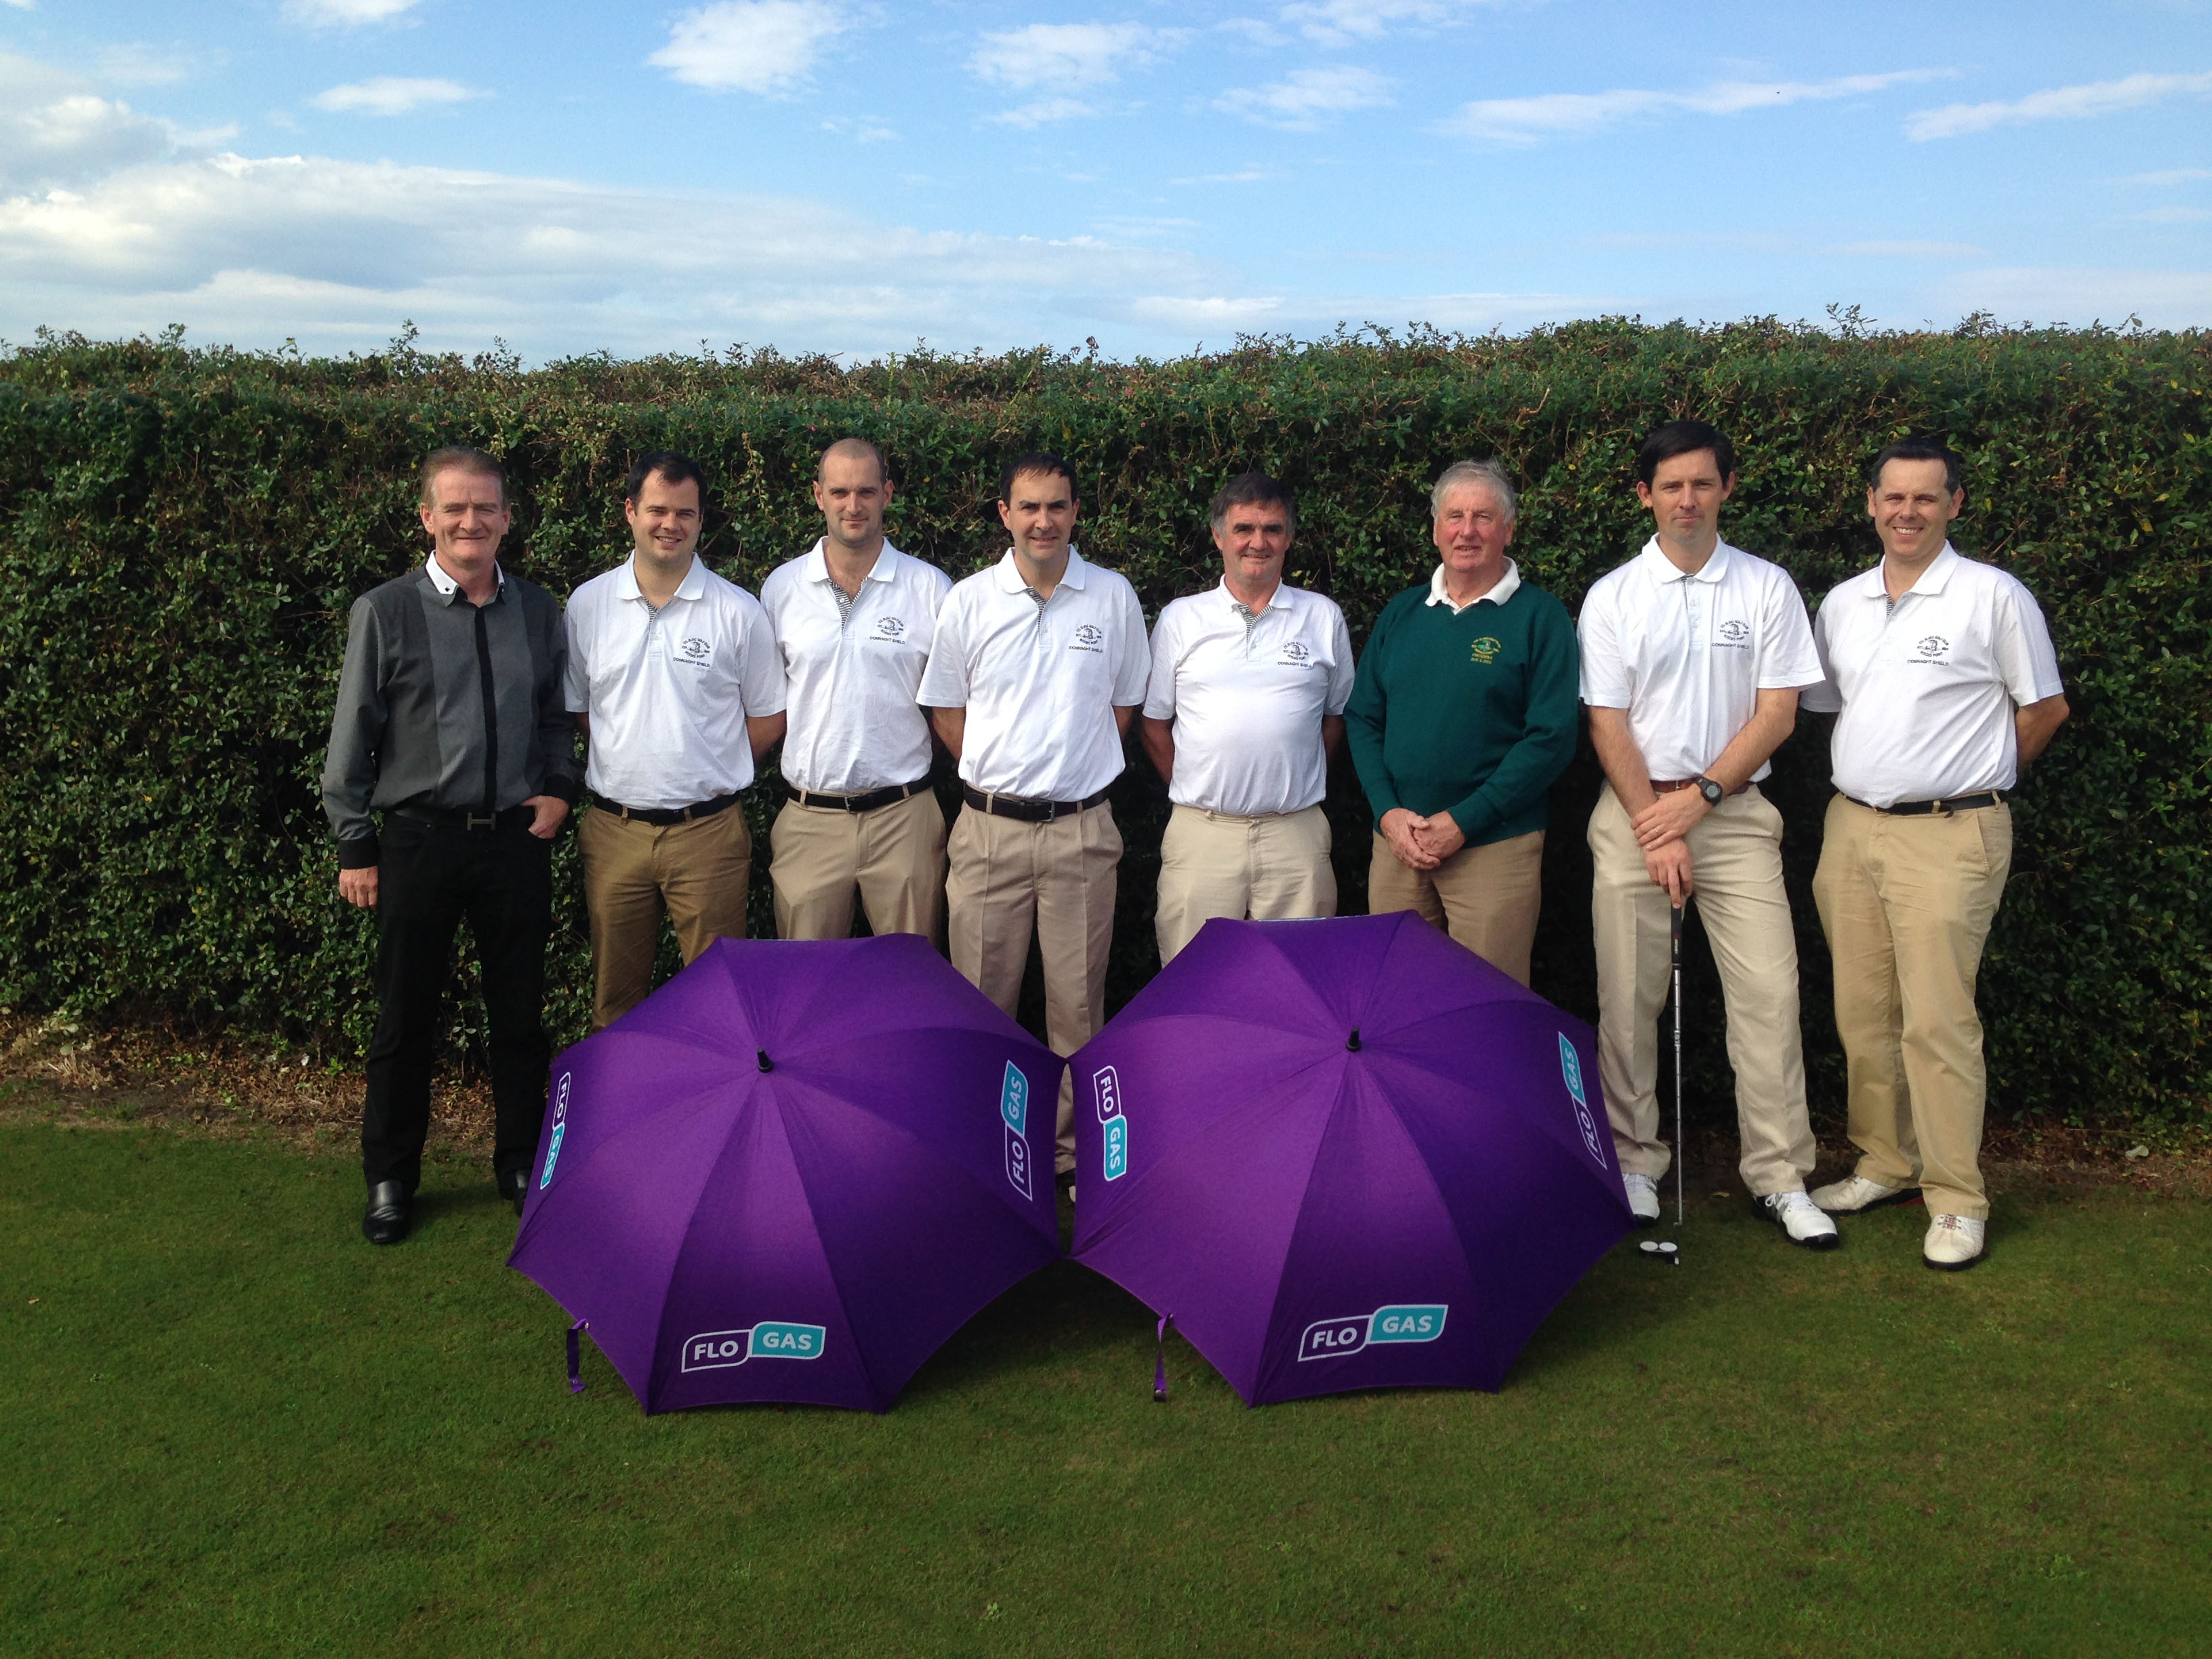 Flogas was proud to sponsor the brollies and balls for the victorious County Sligo golf club at Rosses Point, who teed up for a win against Galway to capture the Connacht Shield for the second year in succession on Sunday 28th September 2013.